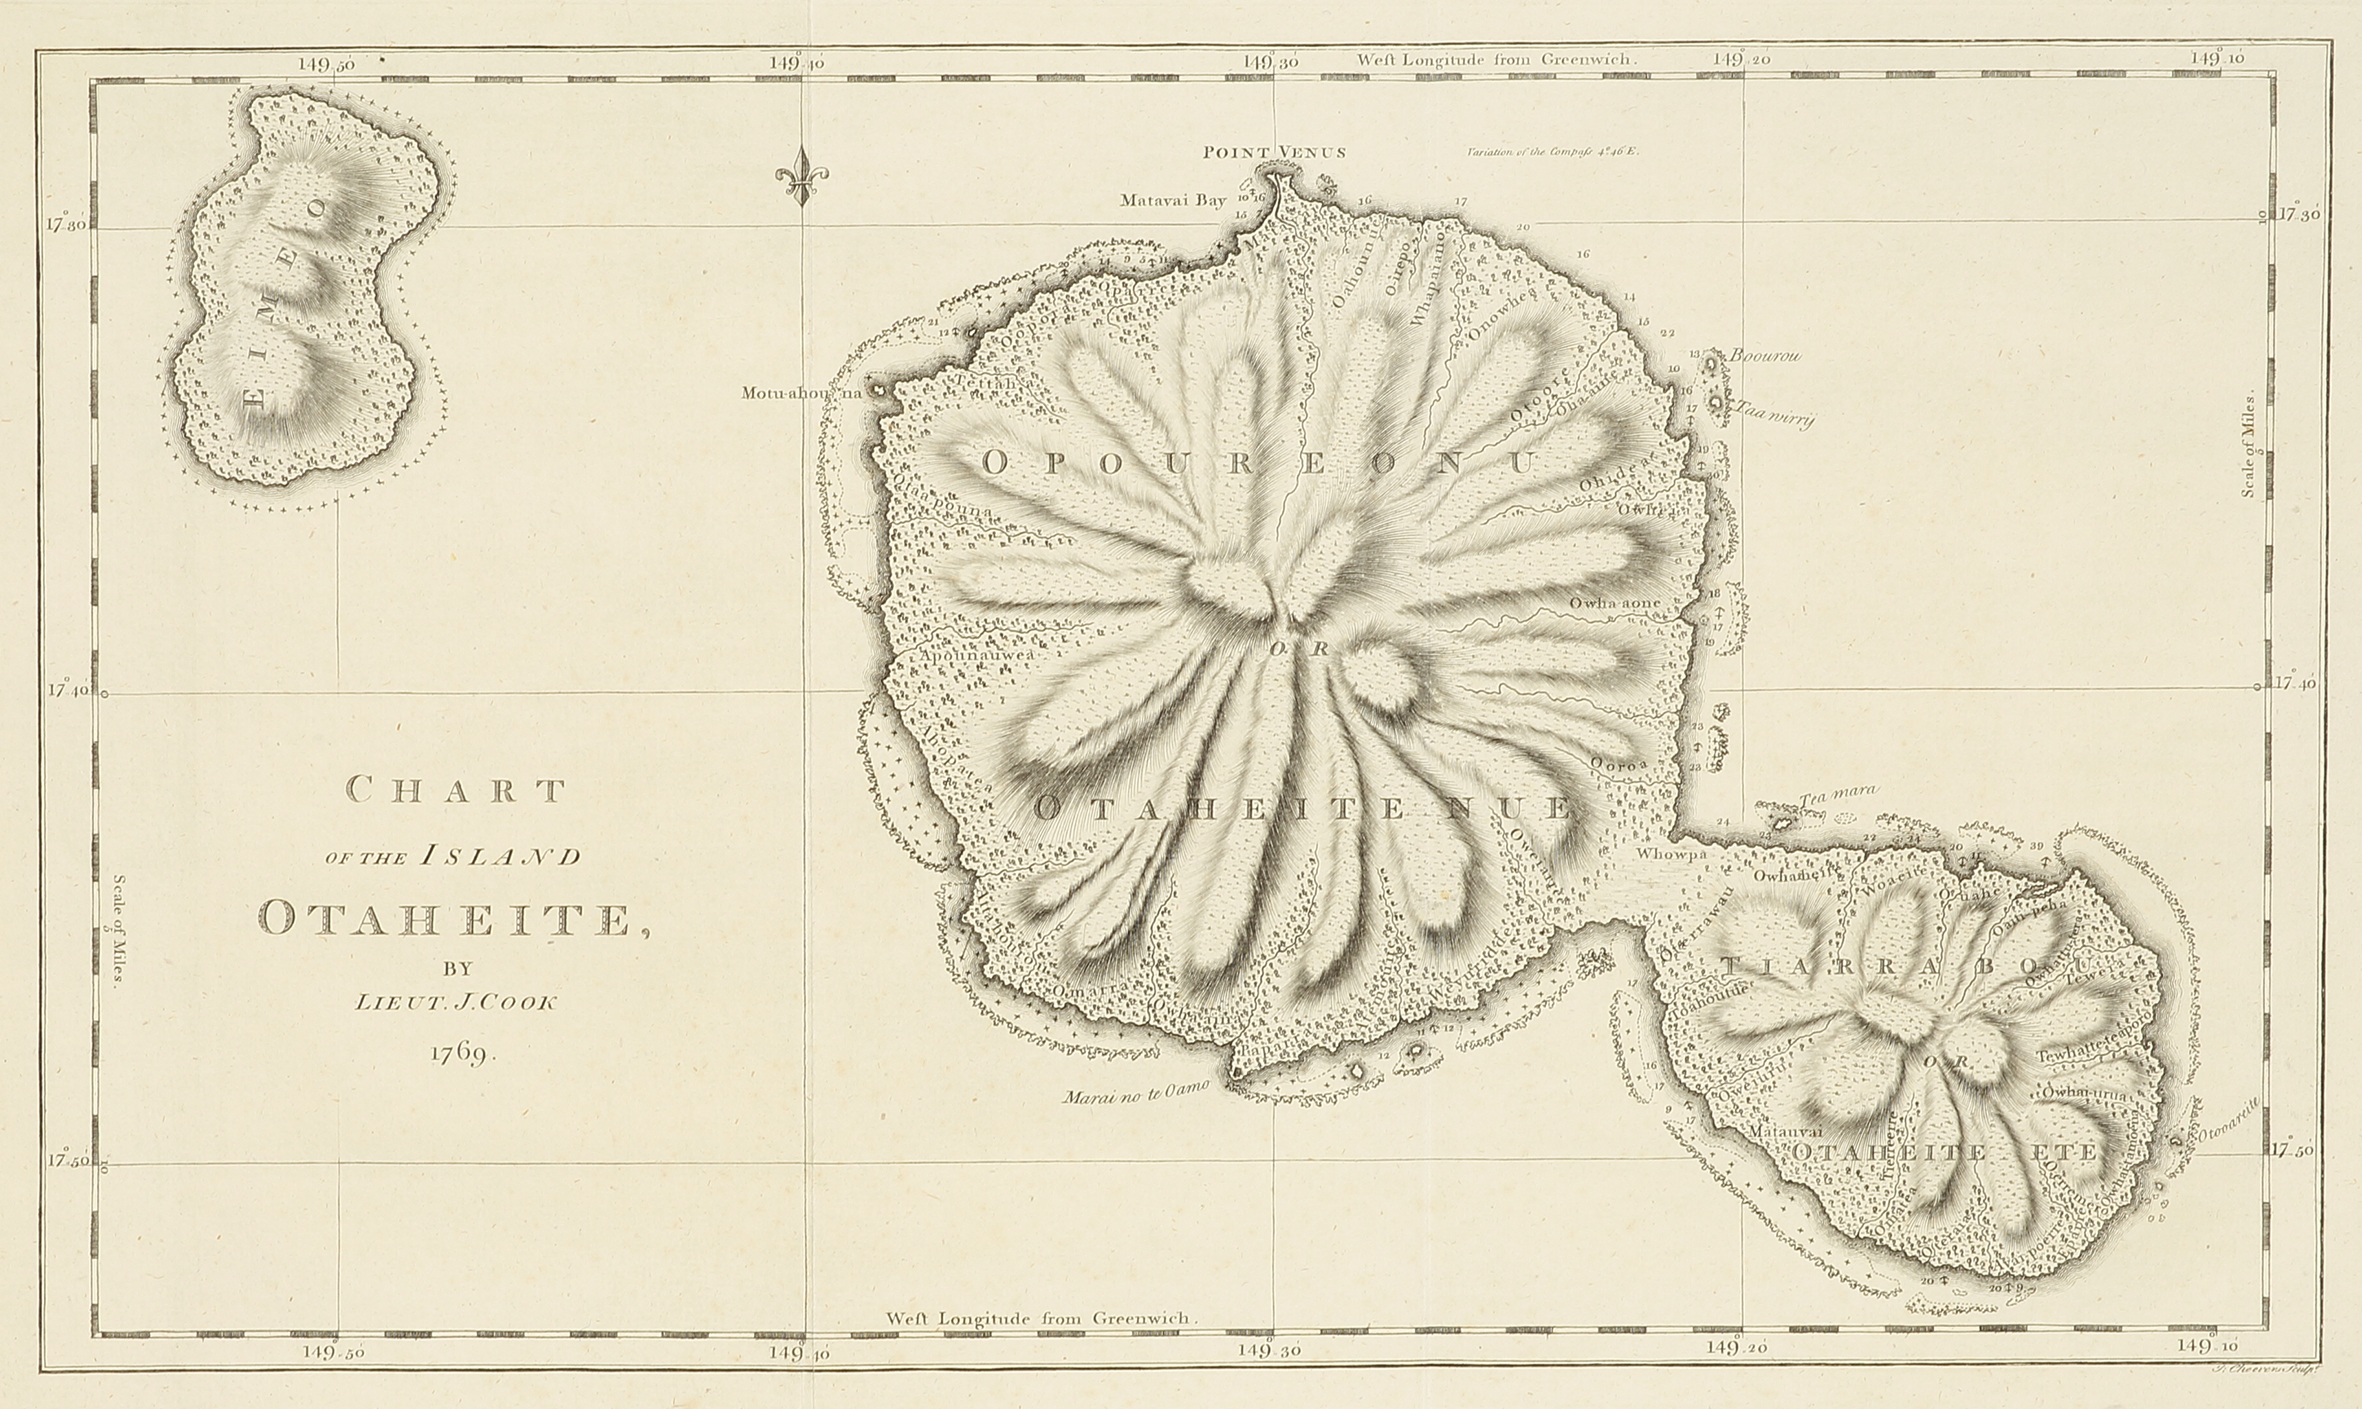 Chart of the Island Otaheite, by Lieut.J.Cook 1769. - Antique Map from 1773